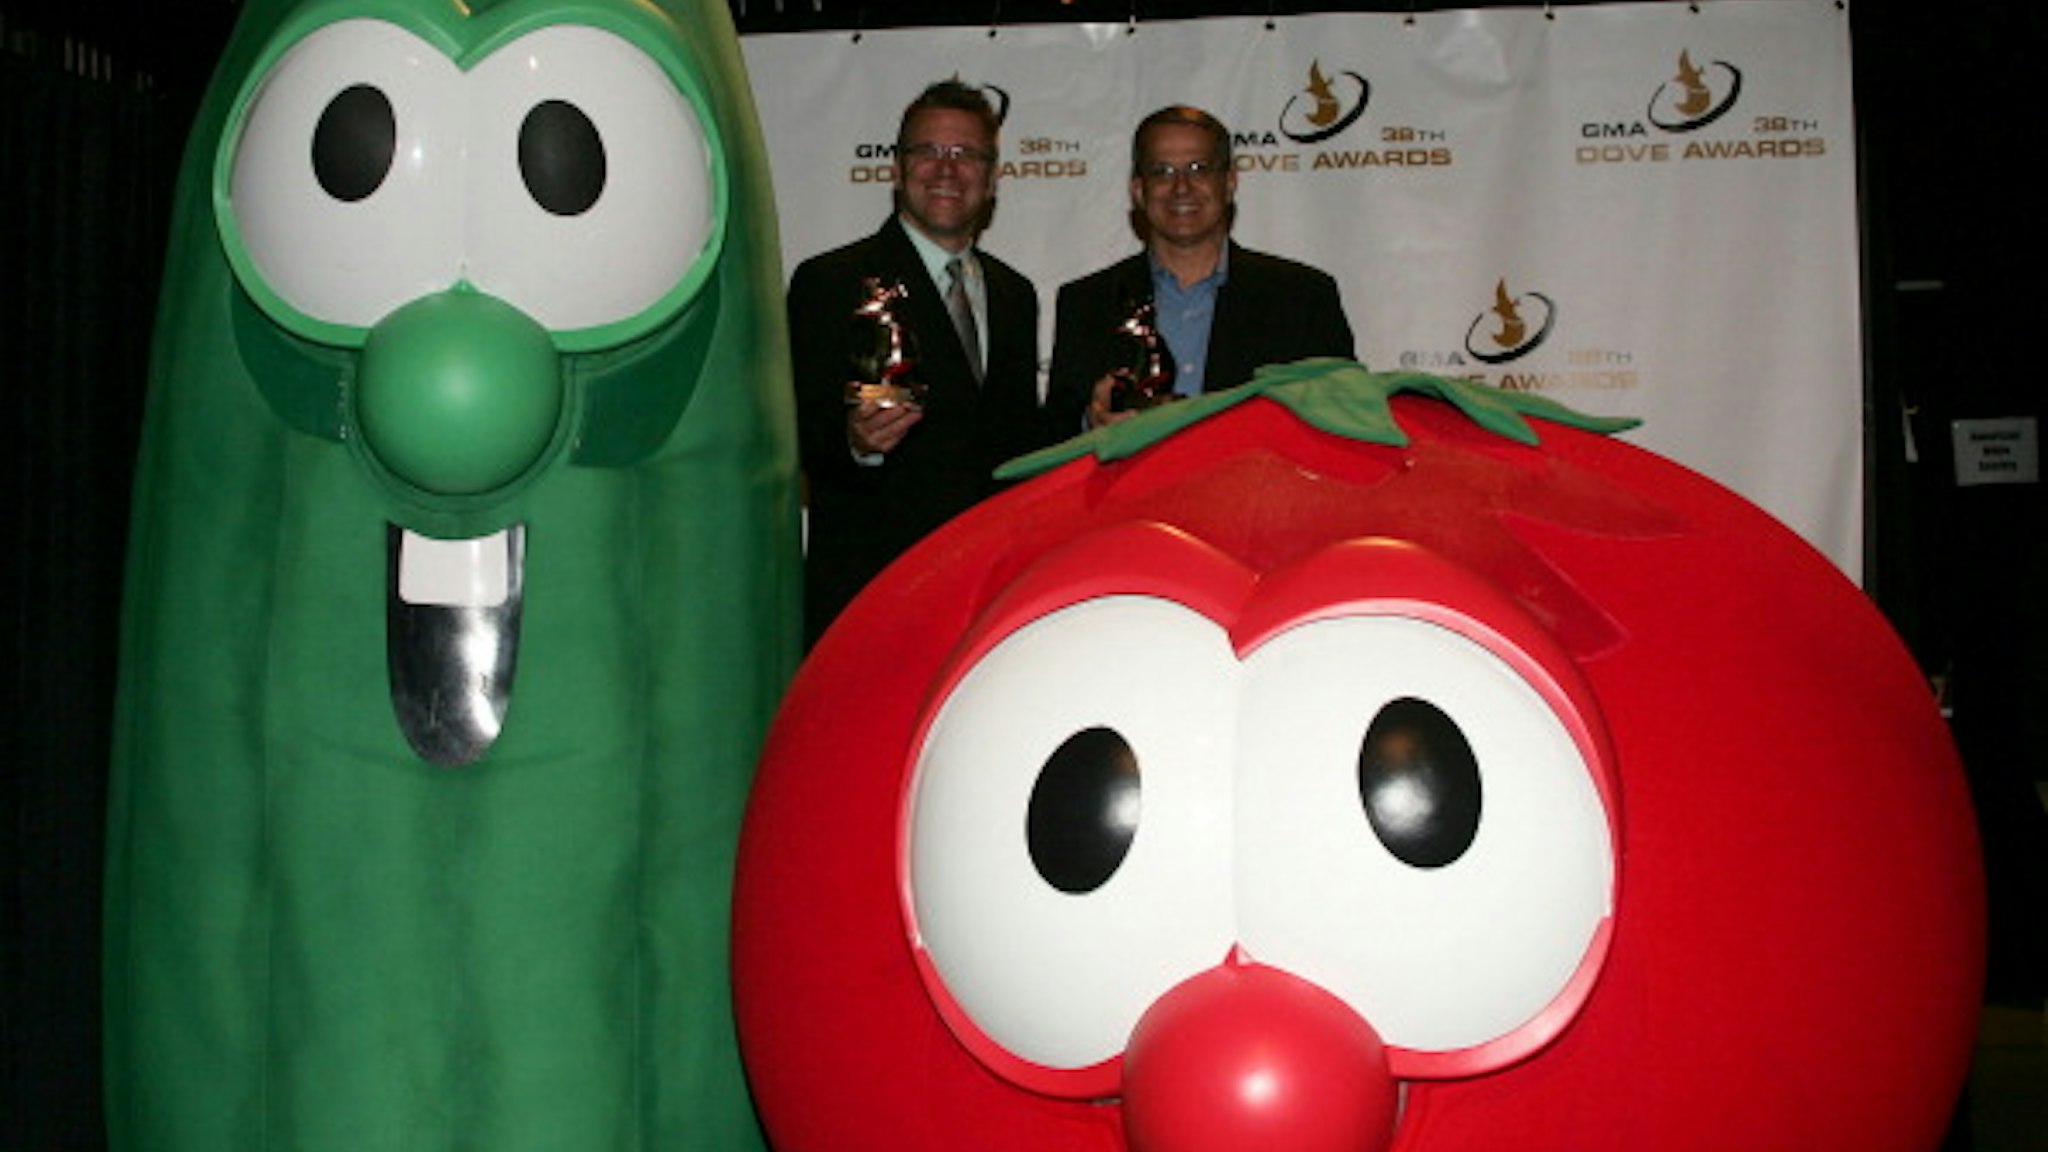 Veggie Tales during 38th Annual GMA DOVE Awards - Press Room at Grand Old Opry in Nashville, United States, United States.